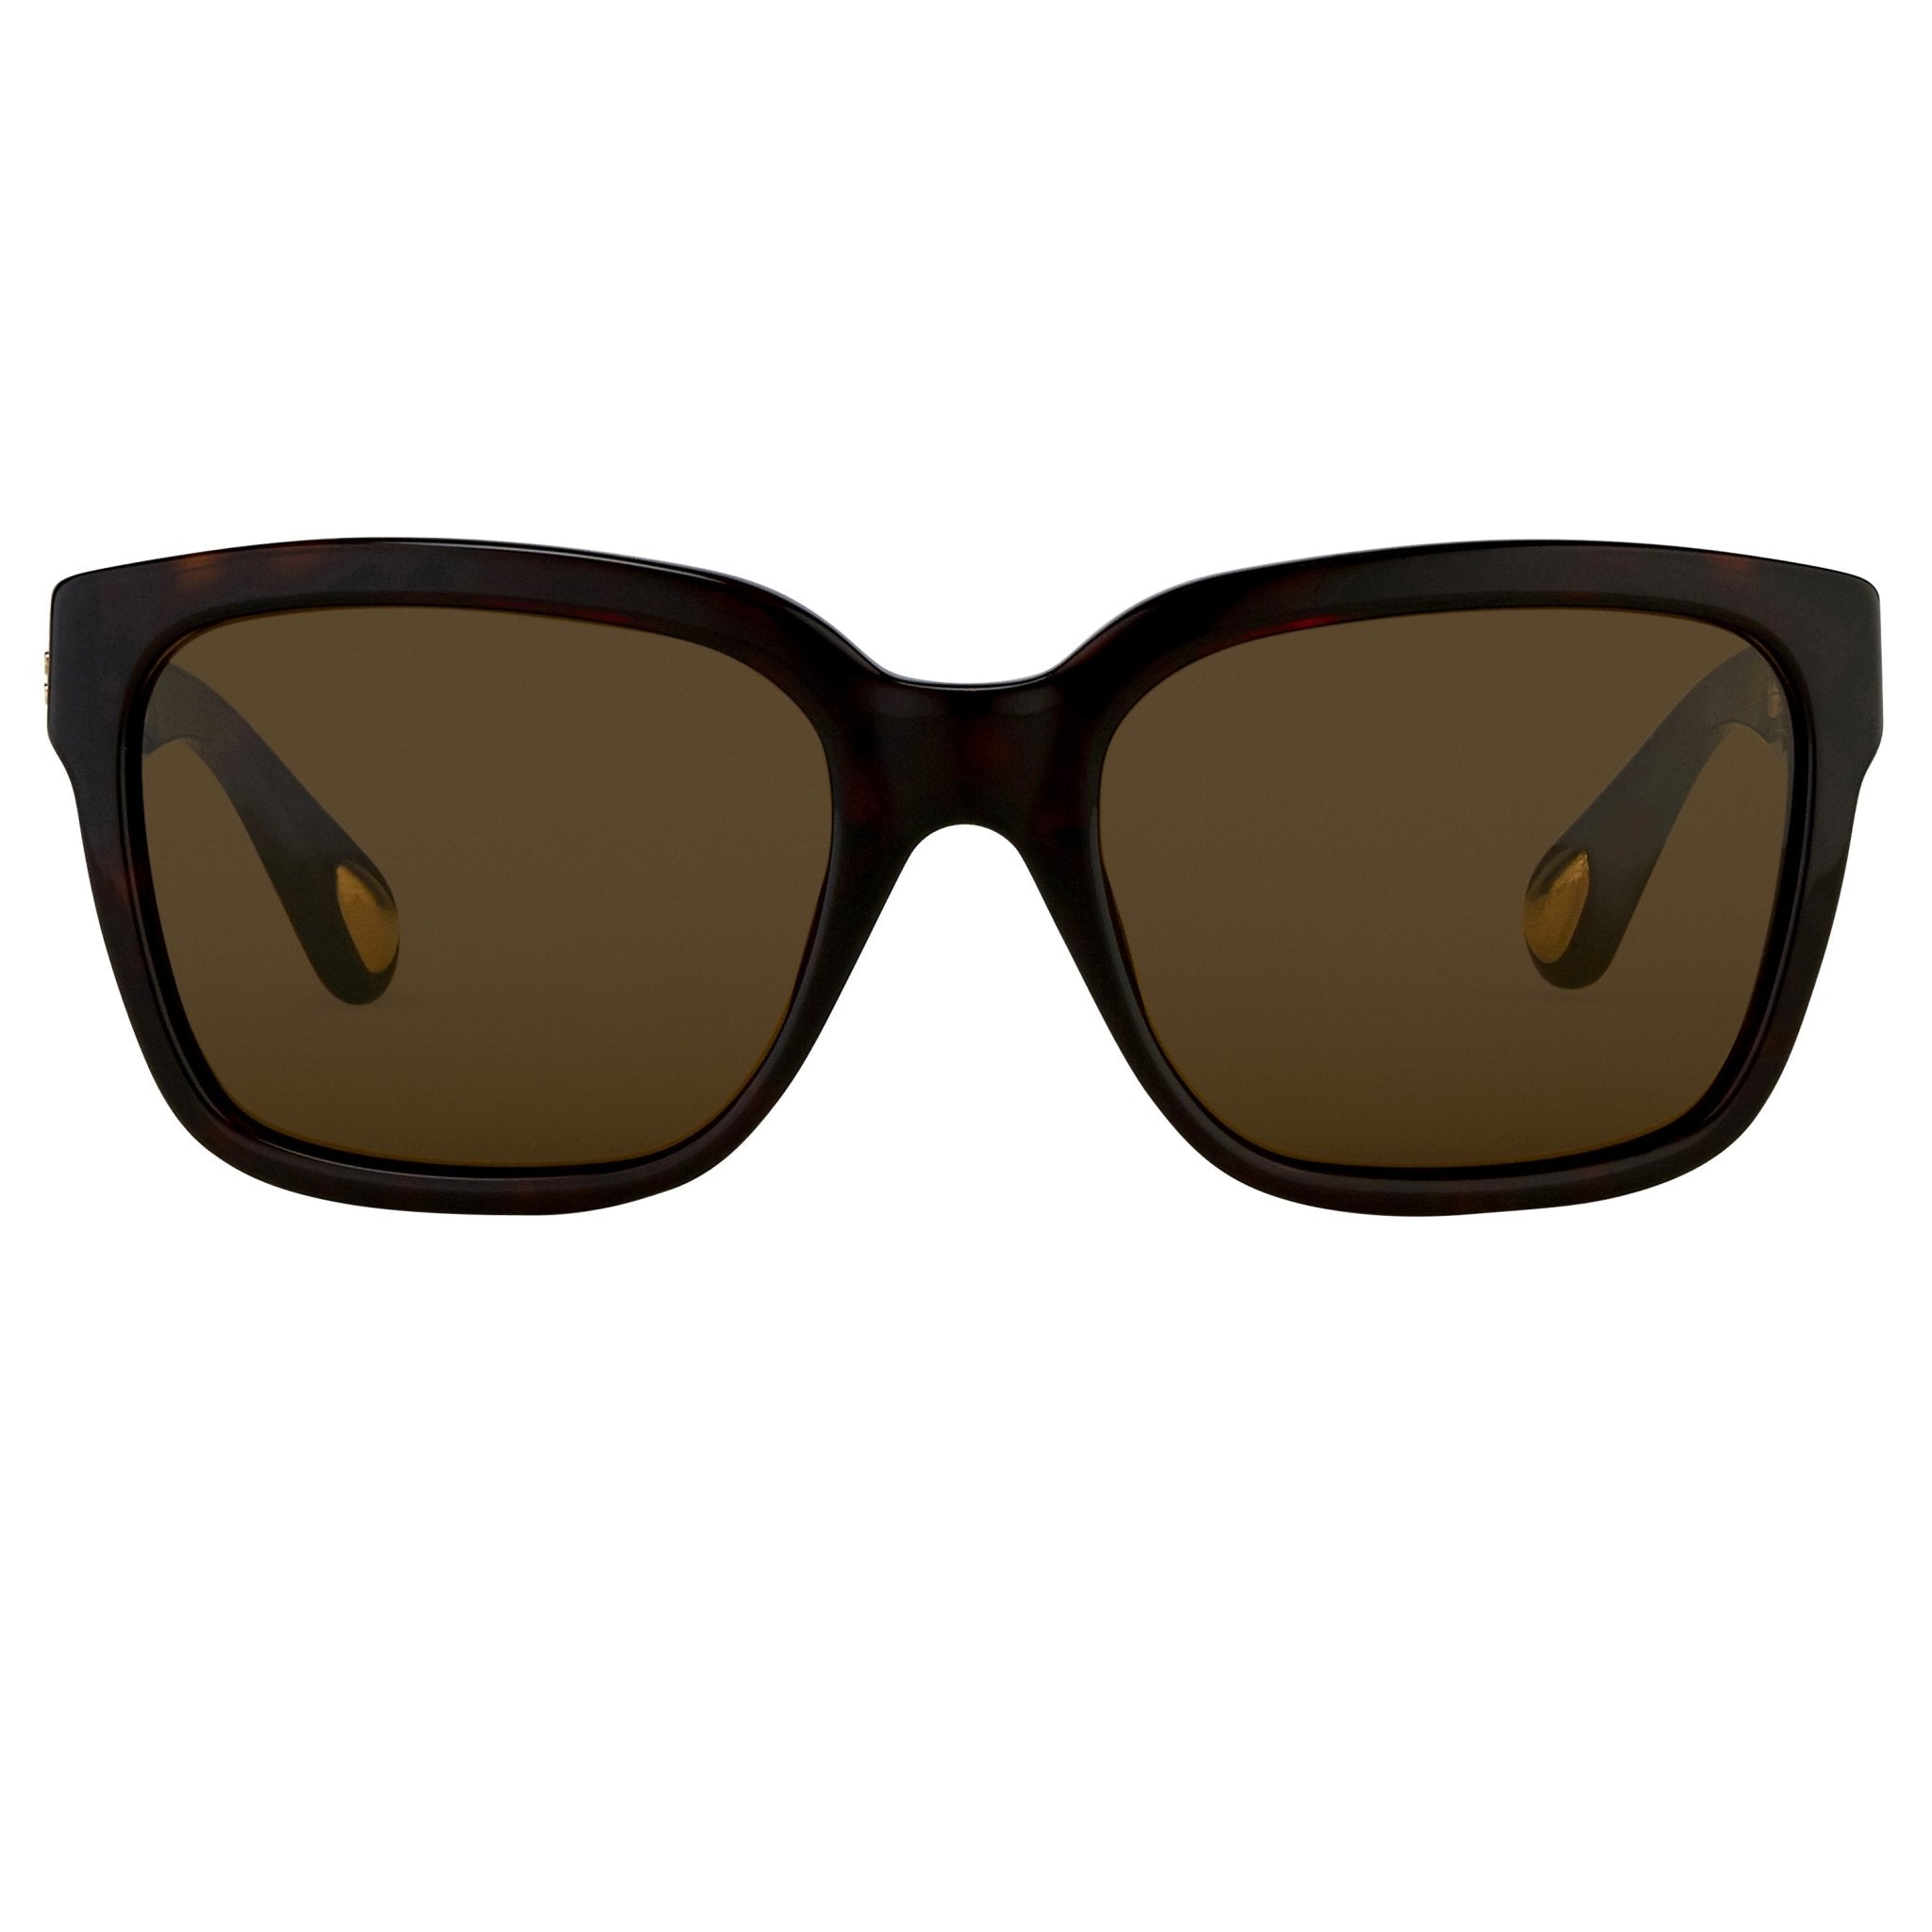 Ann Demeulemeester Sunglasses D-Frame Tortoise Shell 925 Silver with Brown Lenses Category 3 AD9C4SUN - Watches & Crystals